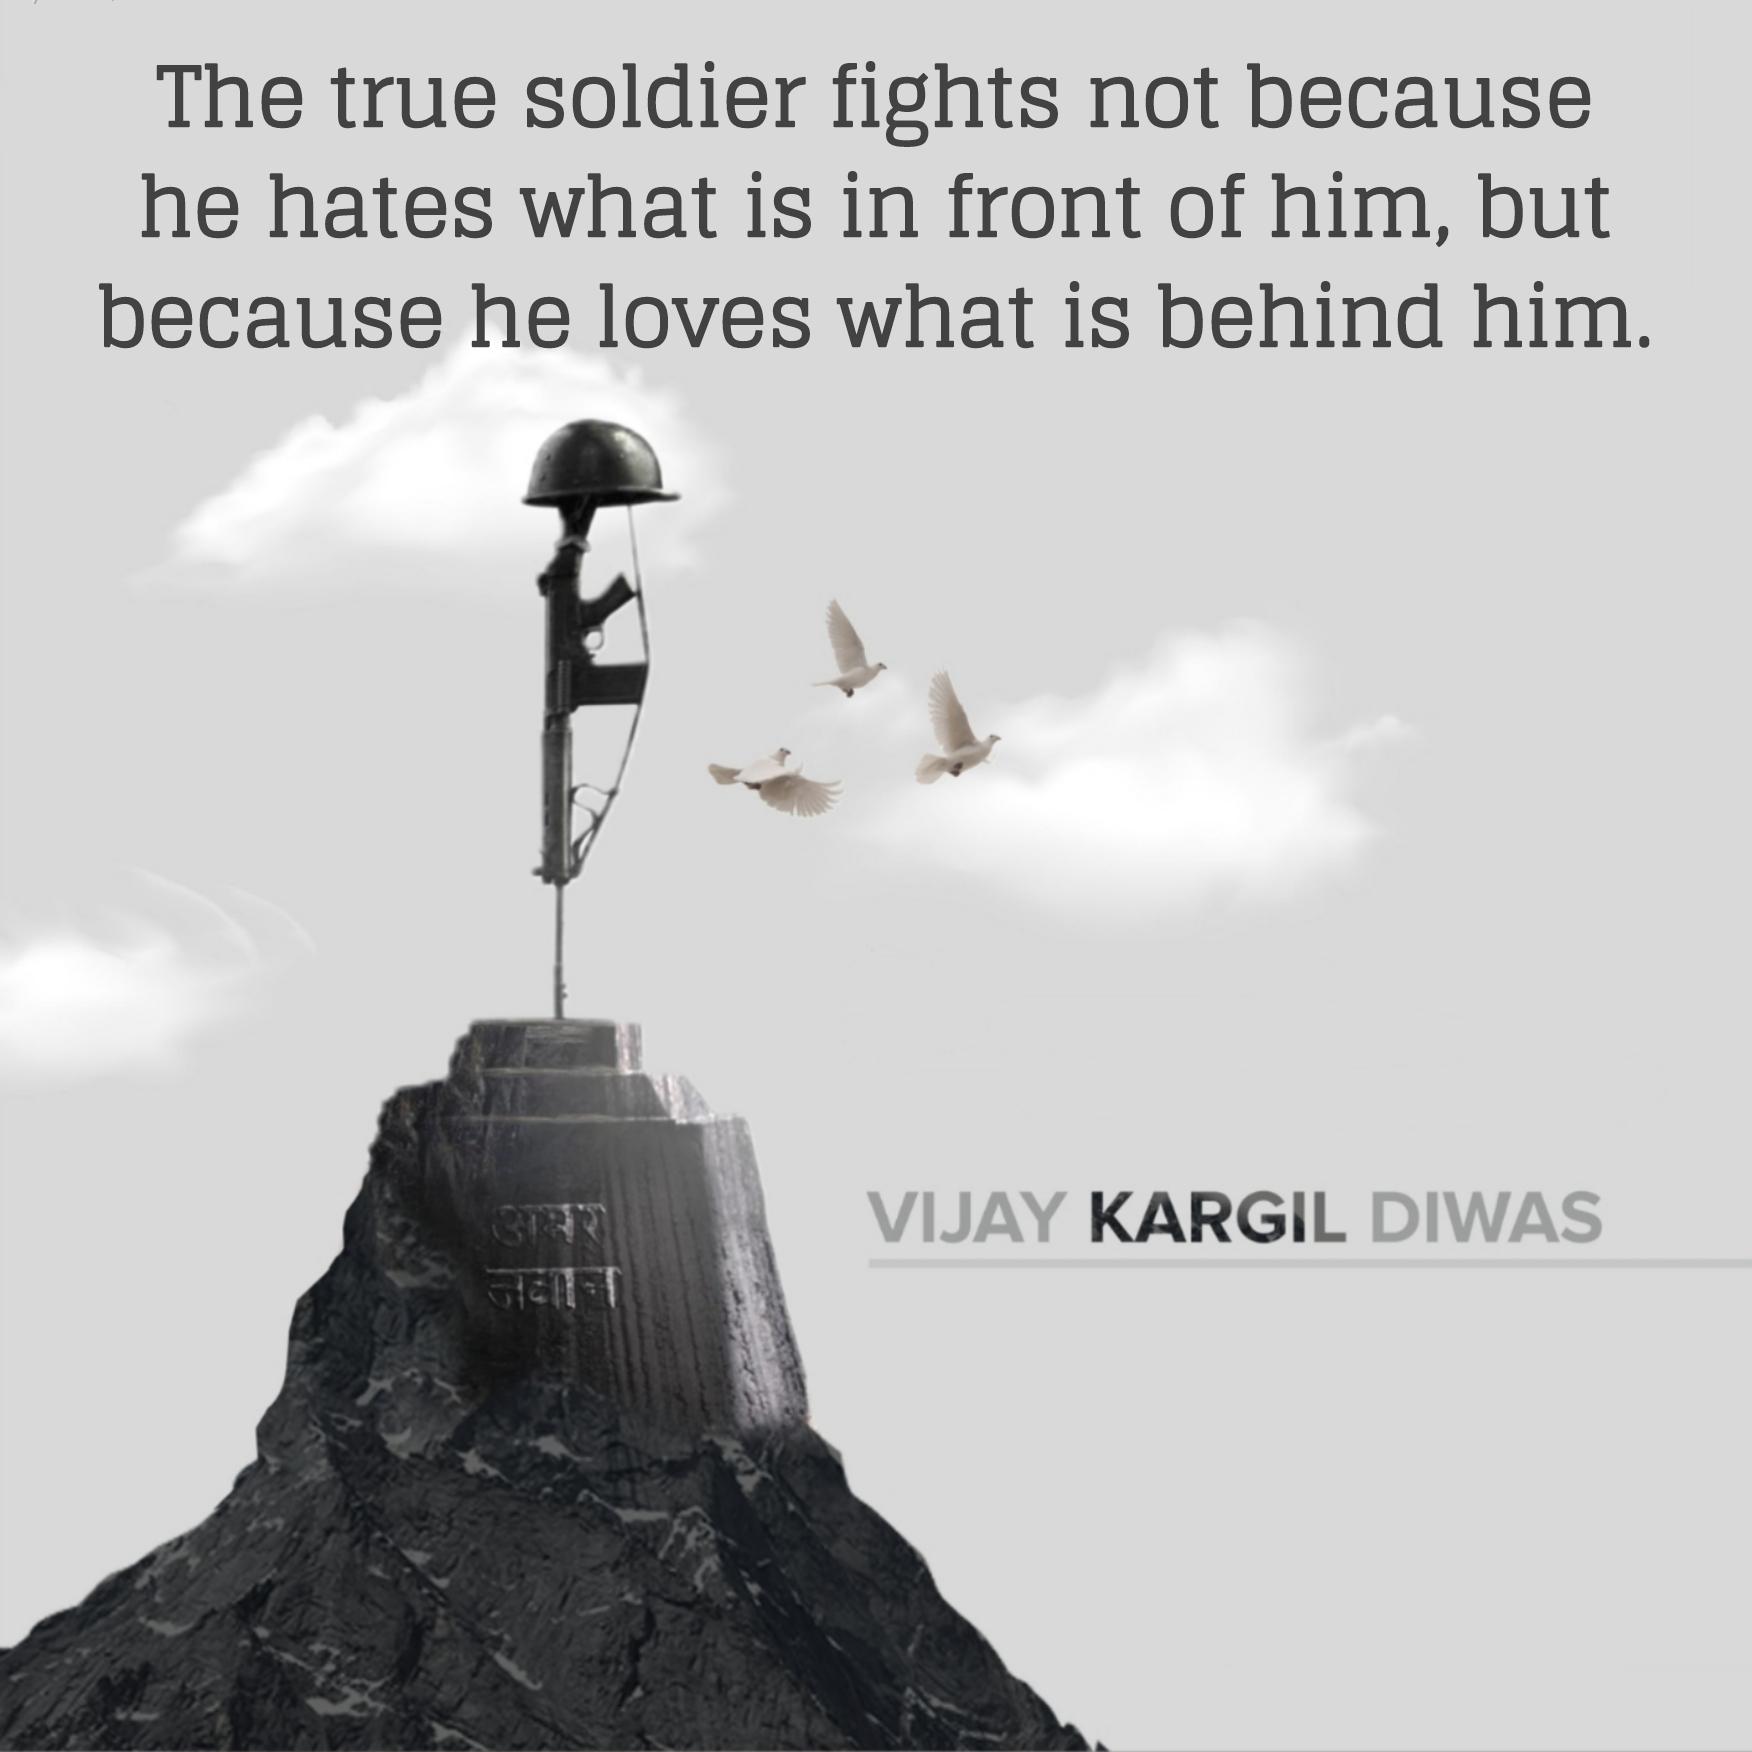 The true soldier fights not because he hates what is in front of him